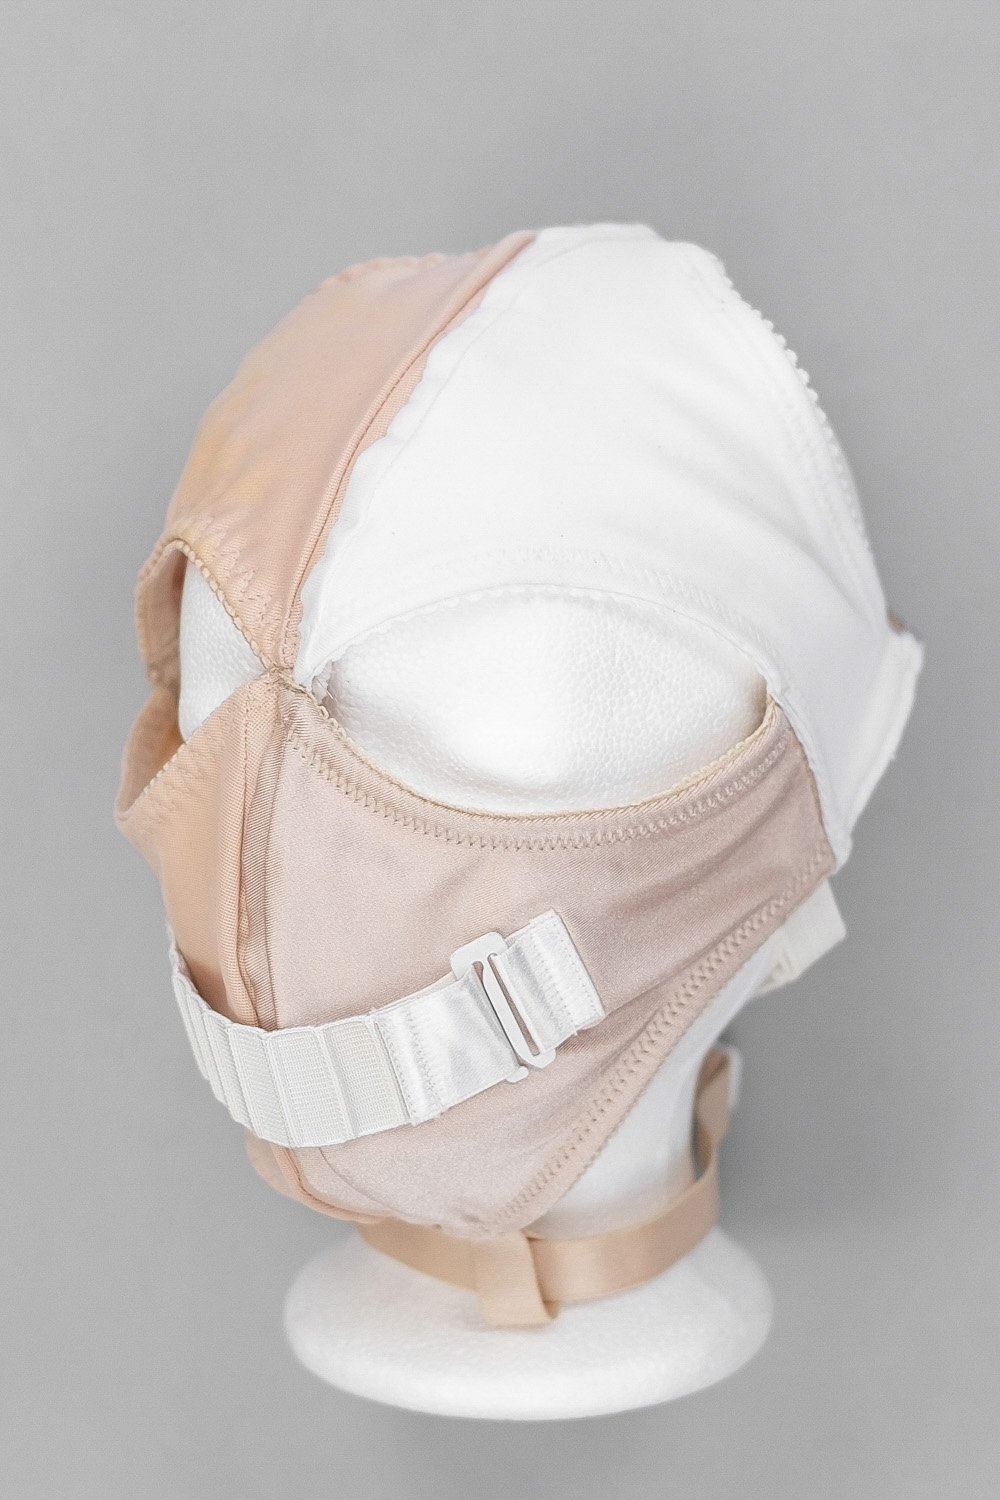 Gusset Mask in Beige and White 2